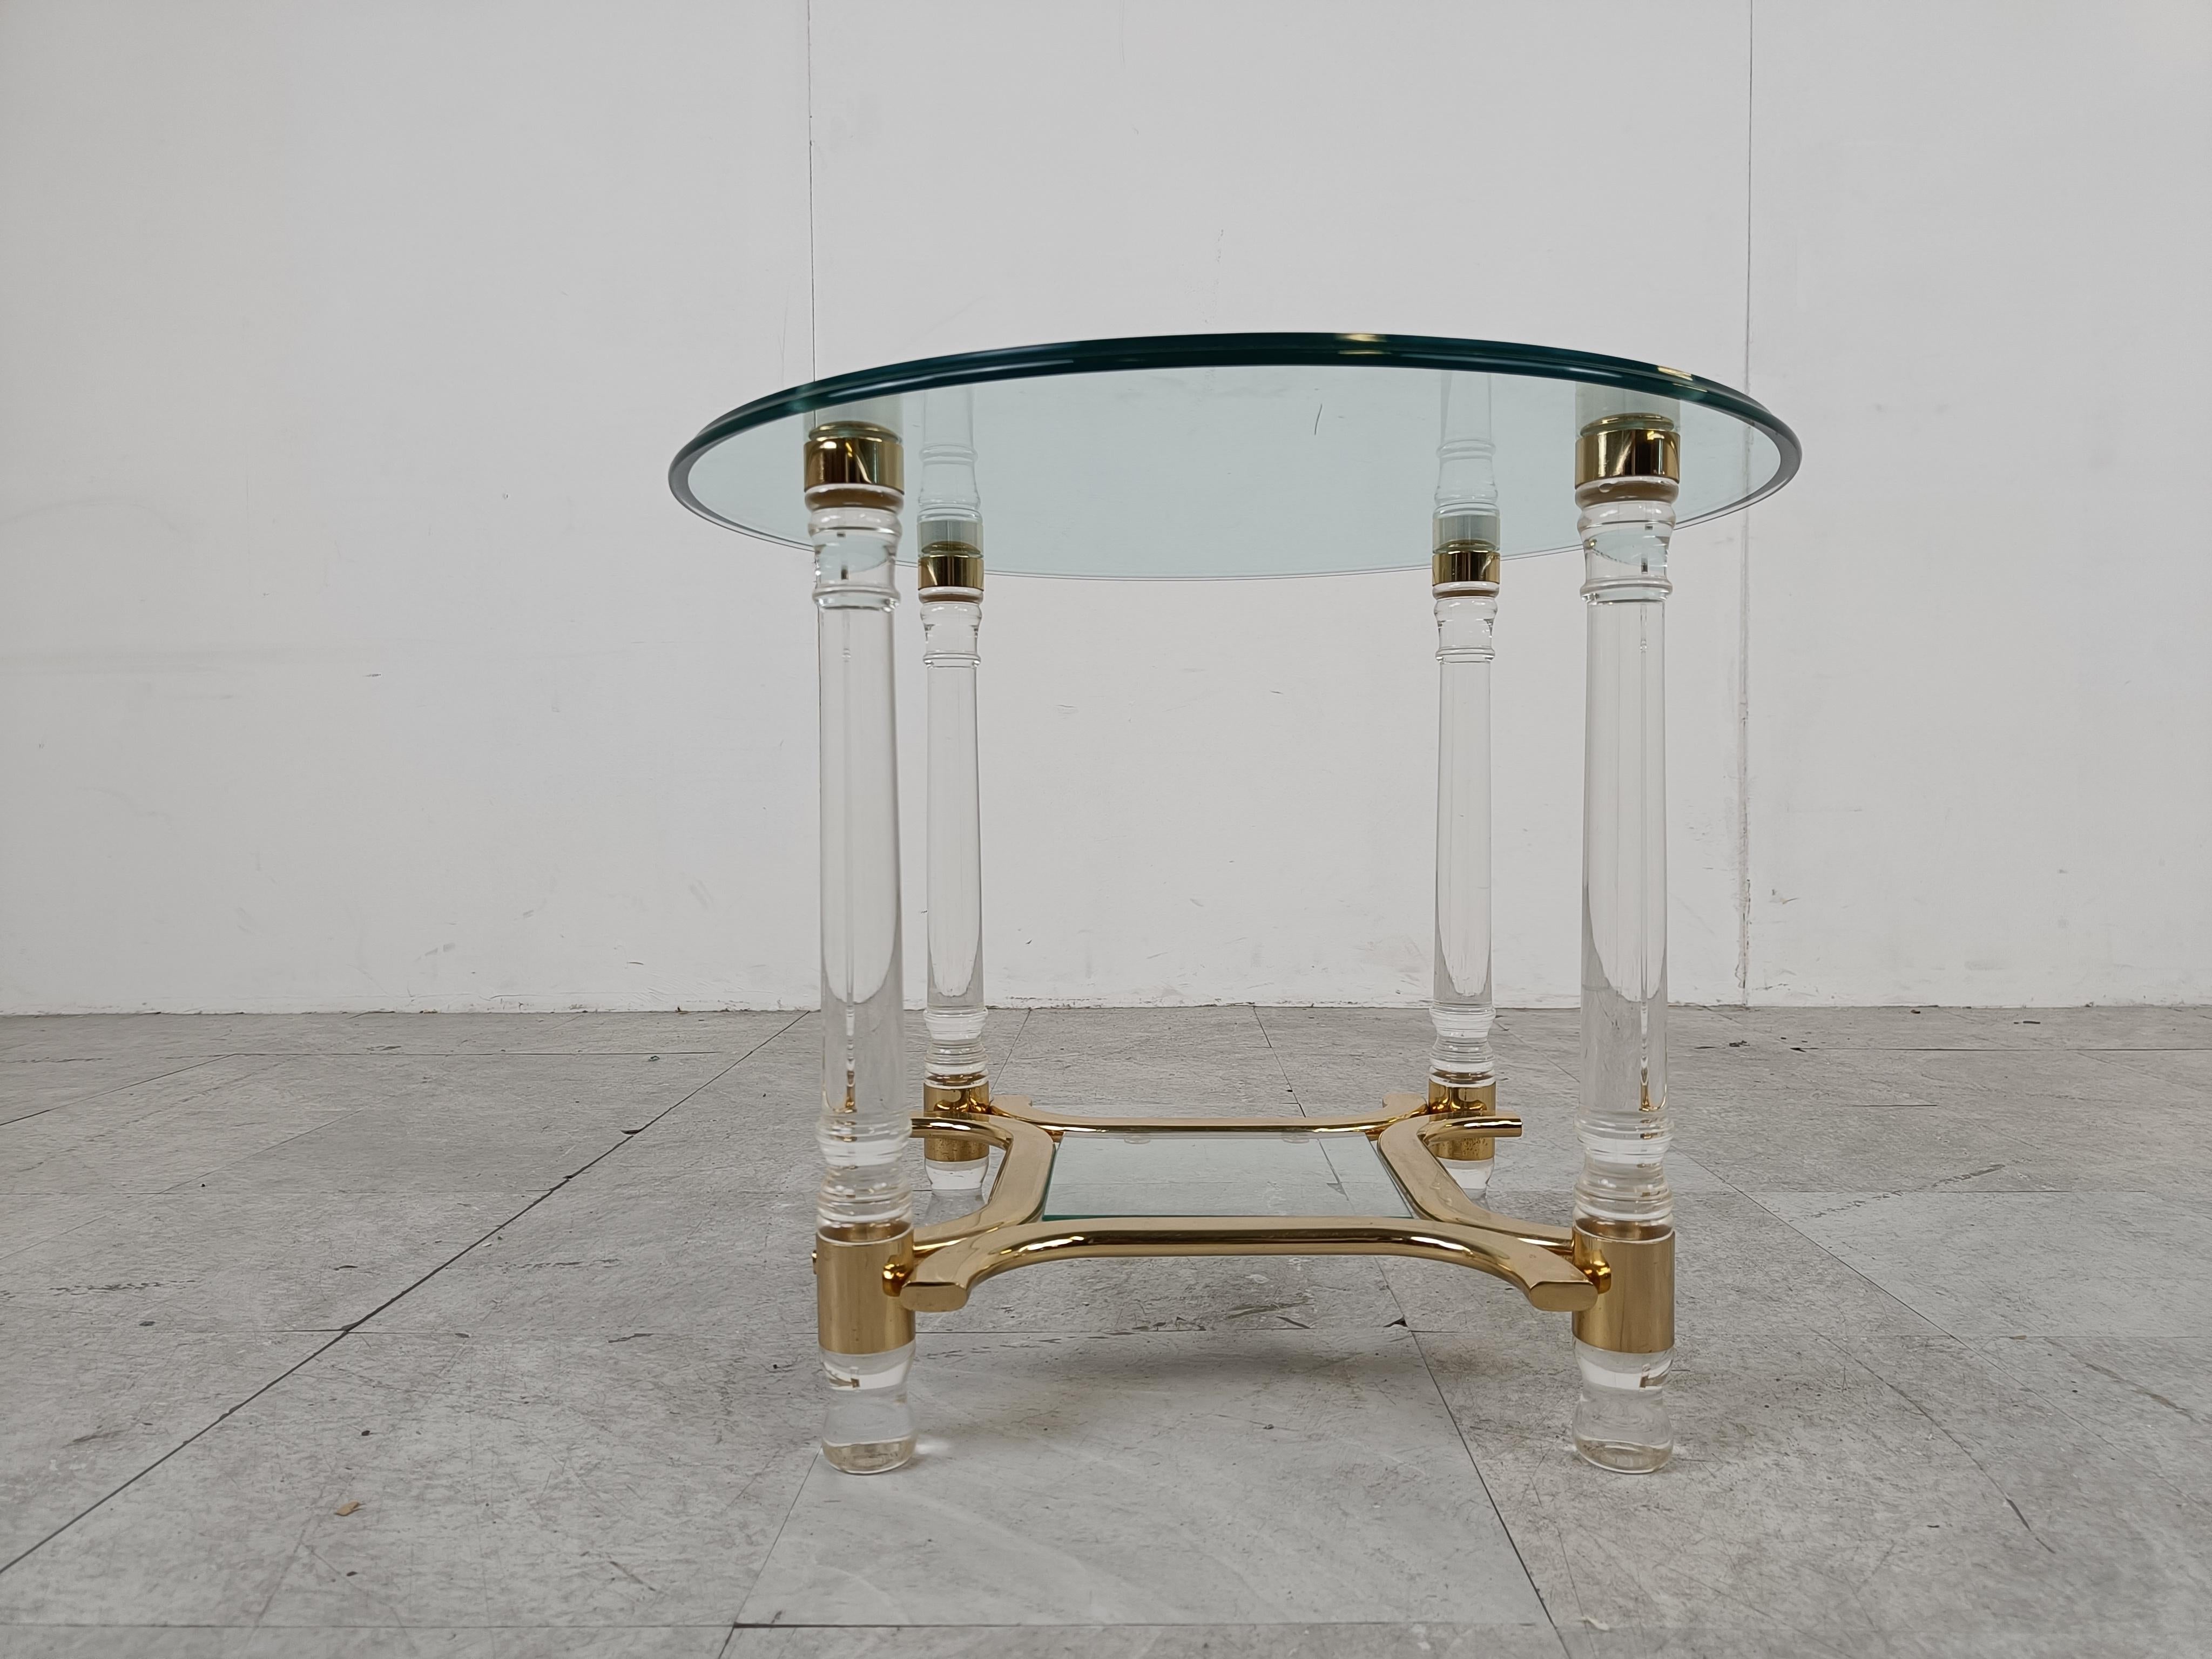 Vintage lucite, glass and brass two tier round side table.

Timeless piece which works with modern day interiors or great to combine with other seventies/eighties glam pieces.

1970s - Belgium

Good overall condition with normal wear and tear.